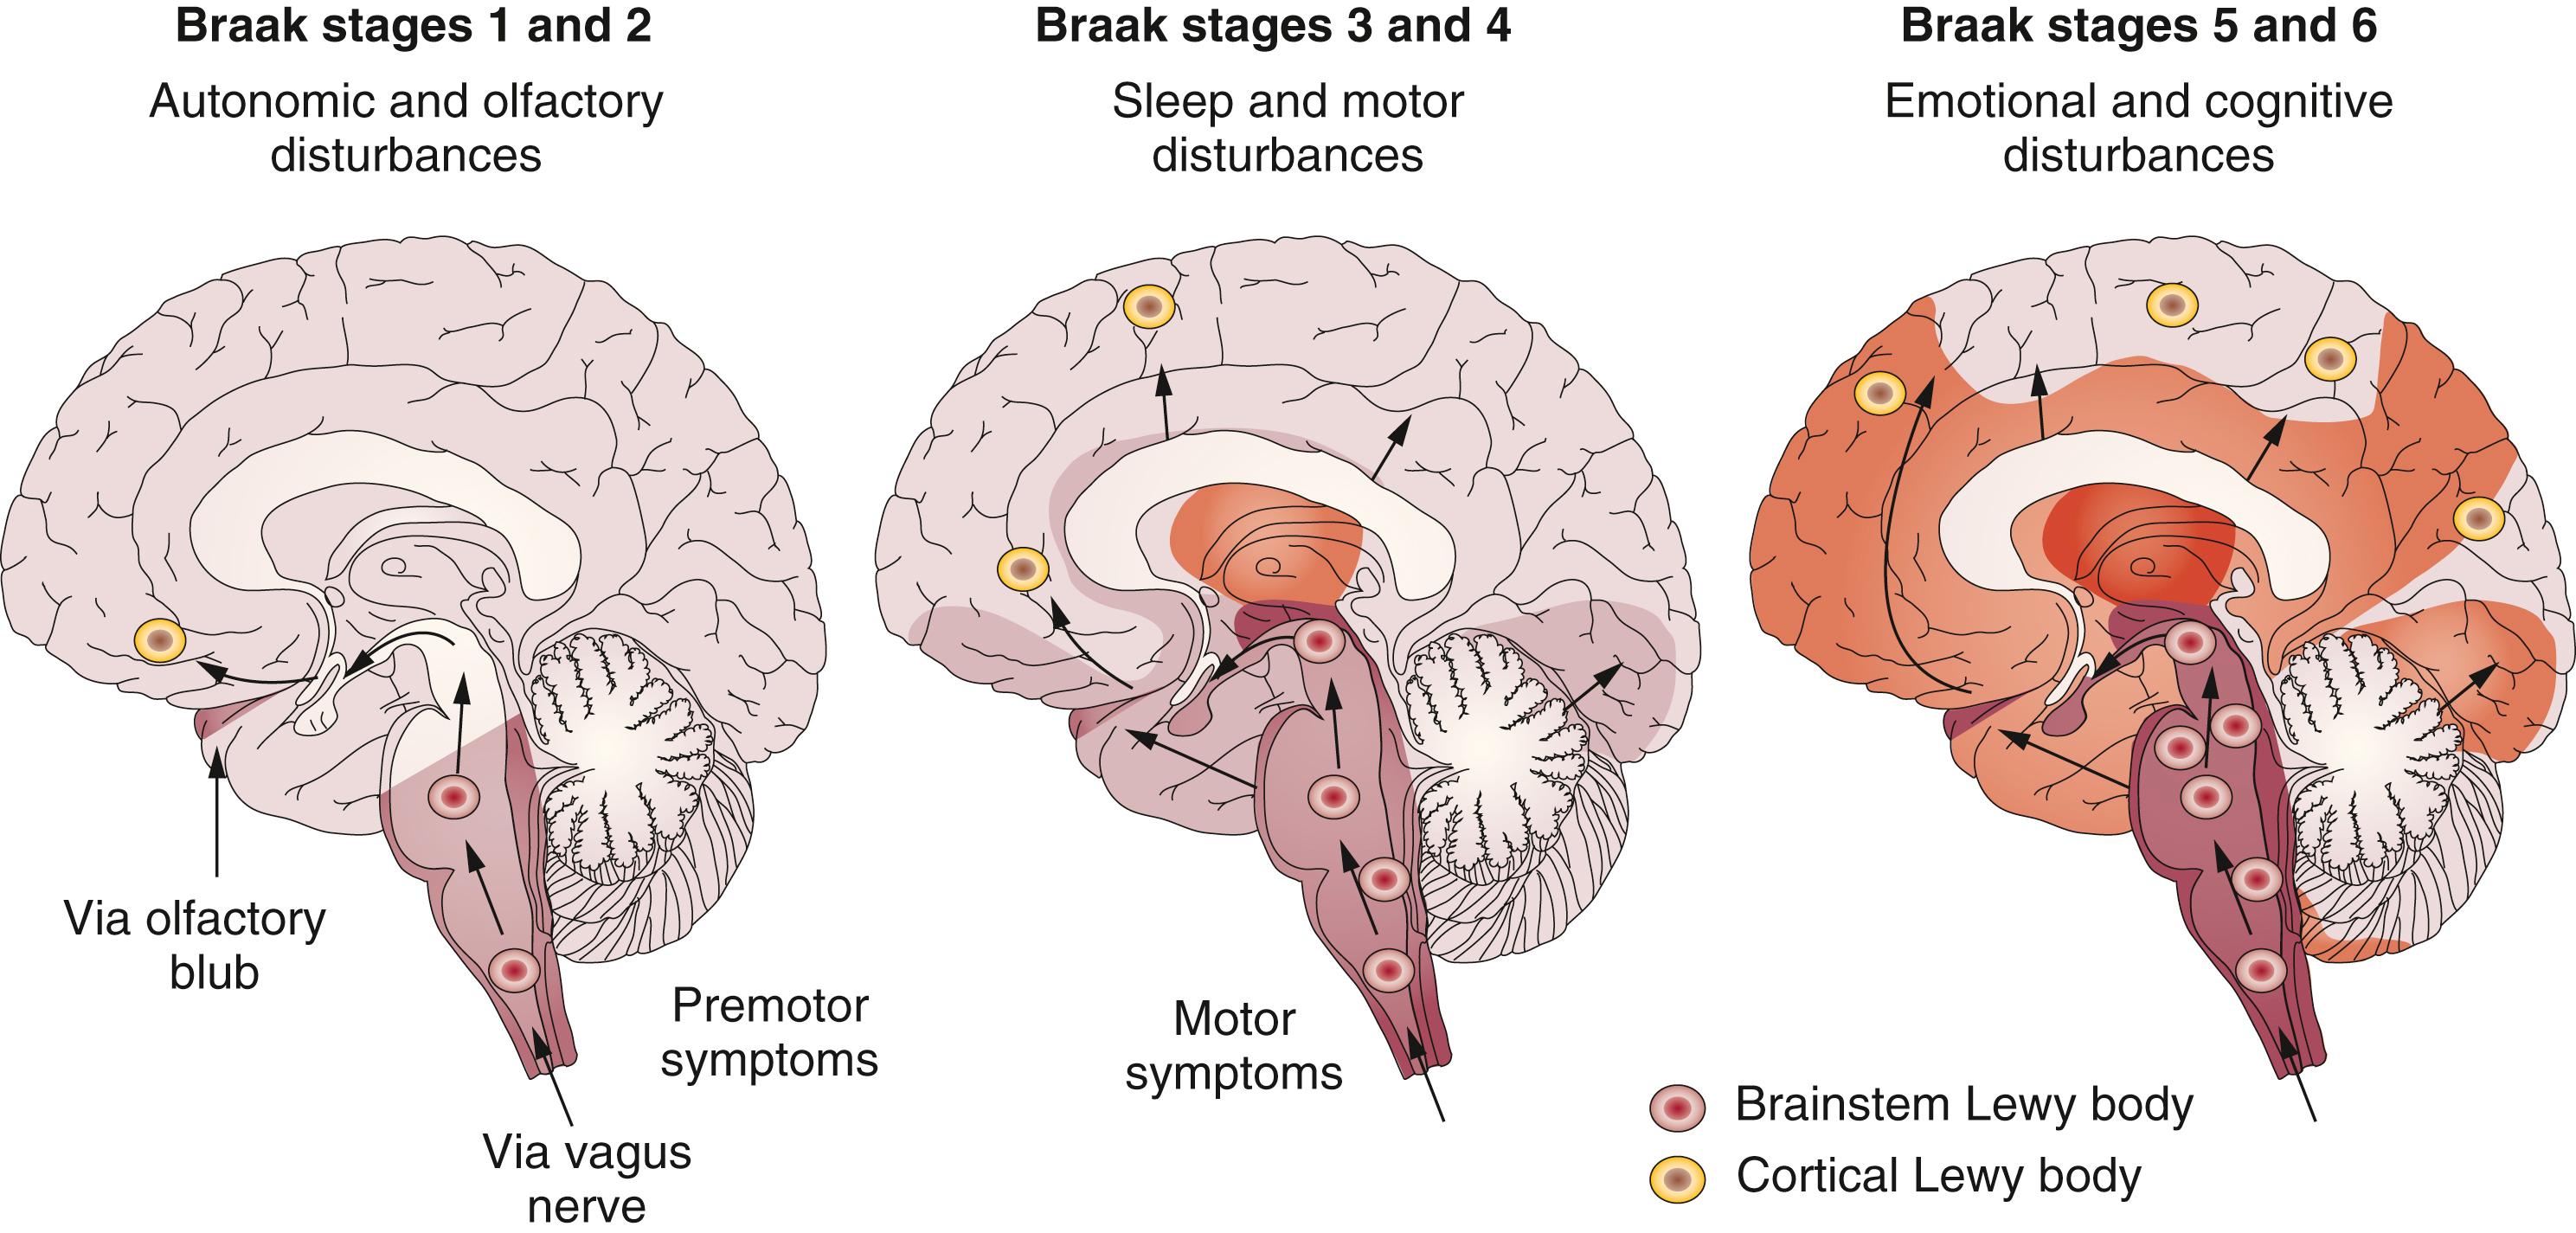 Figure 104.2, Stylized representation of the Braak staging of Lewy body pathology showing initiation sites in the medulla oblongata and olfactory bulb, progressing to the midbrain and finally to cortical regions.